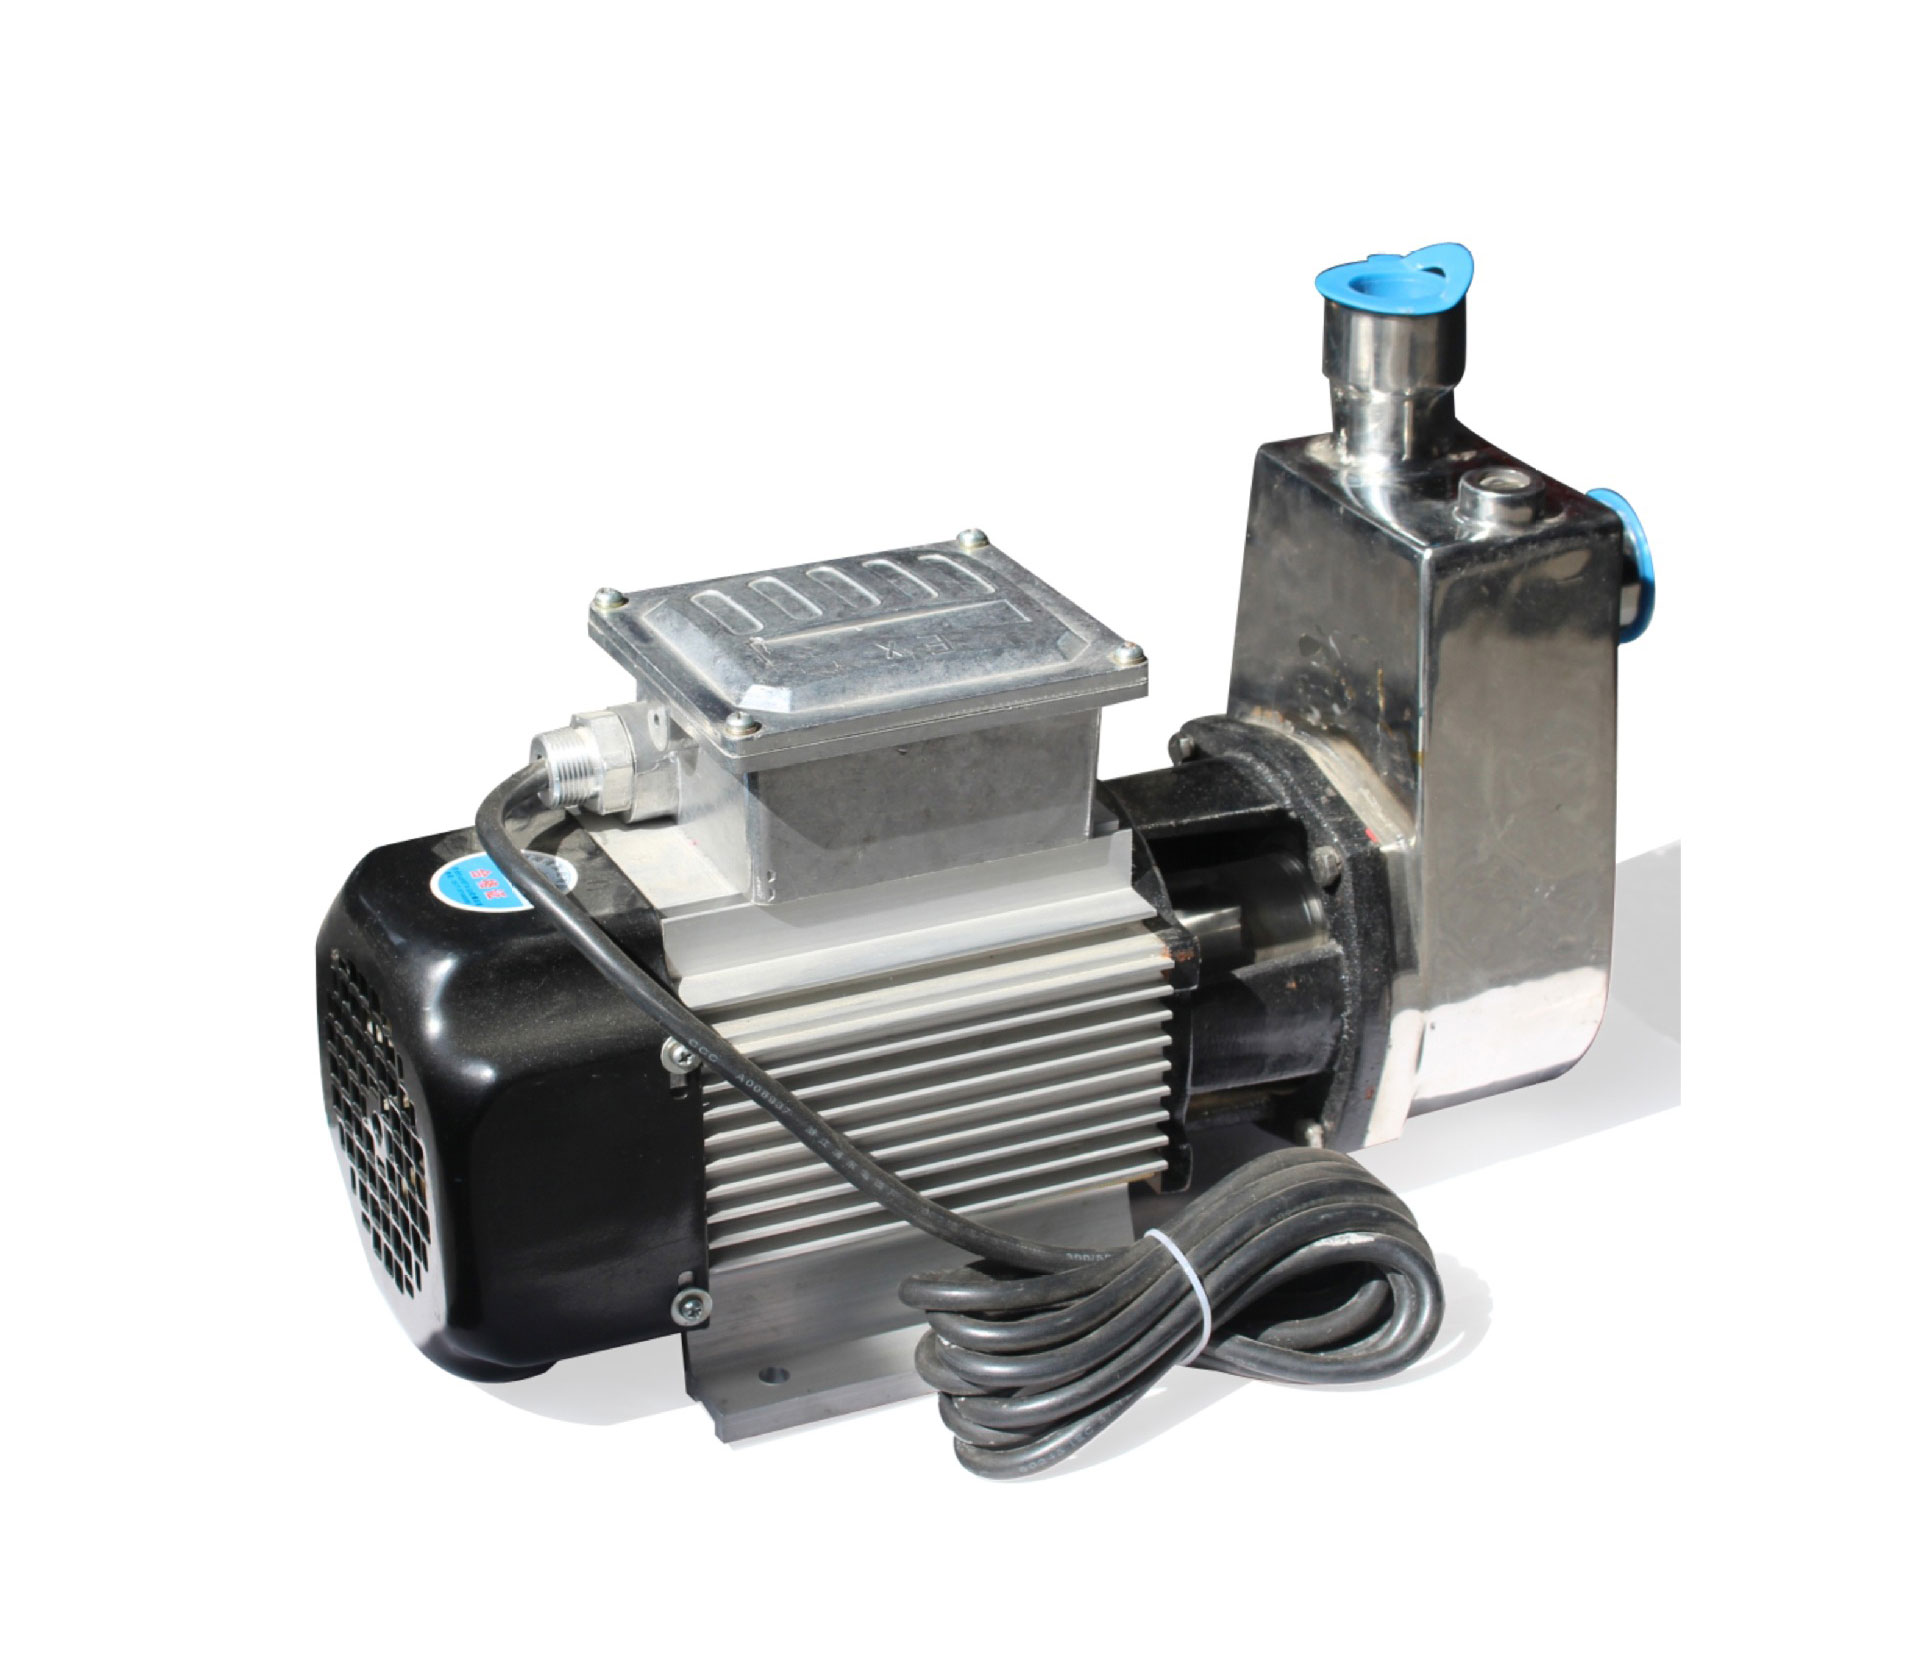 Stainless steel drainage pump